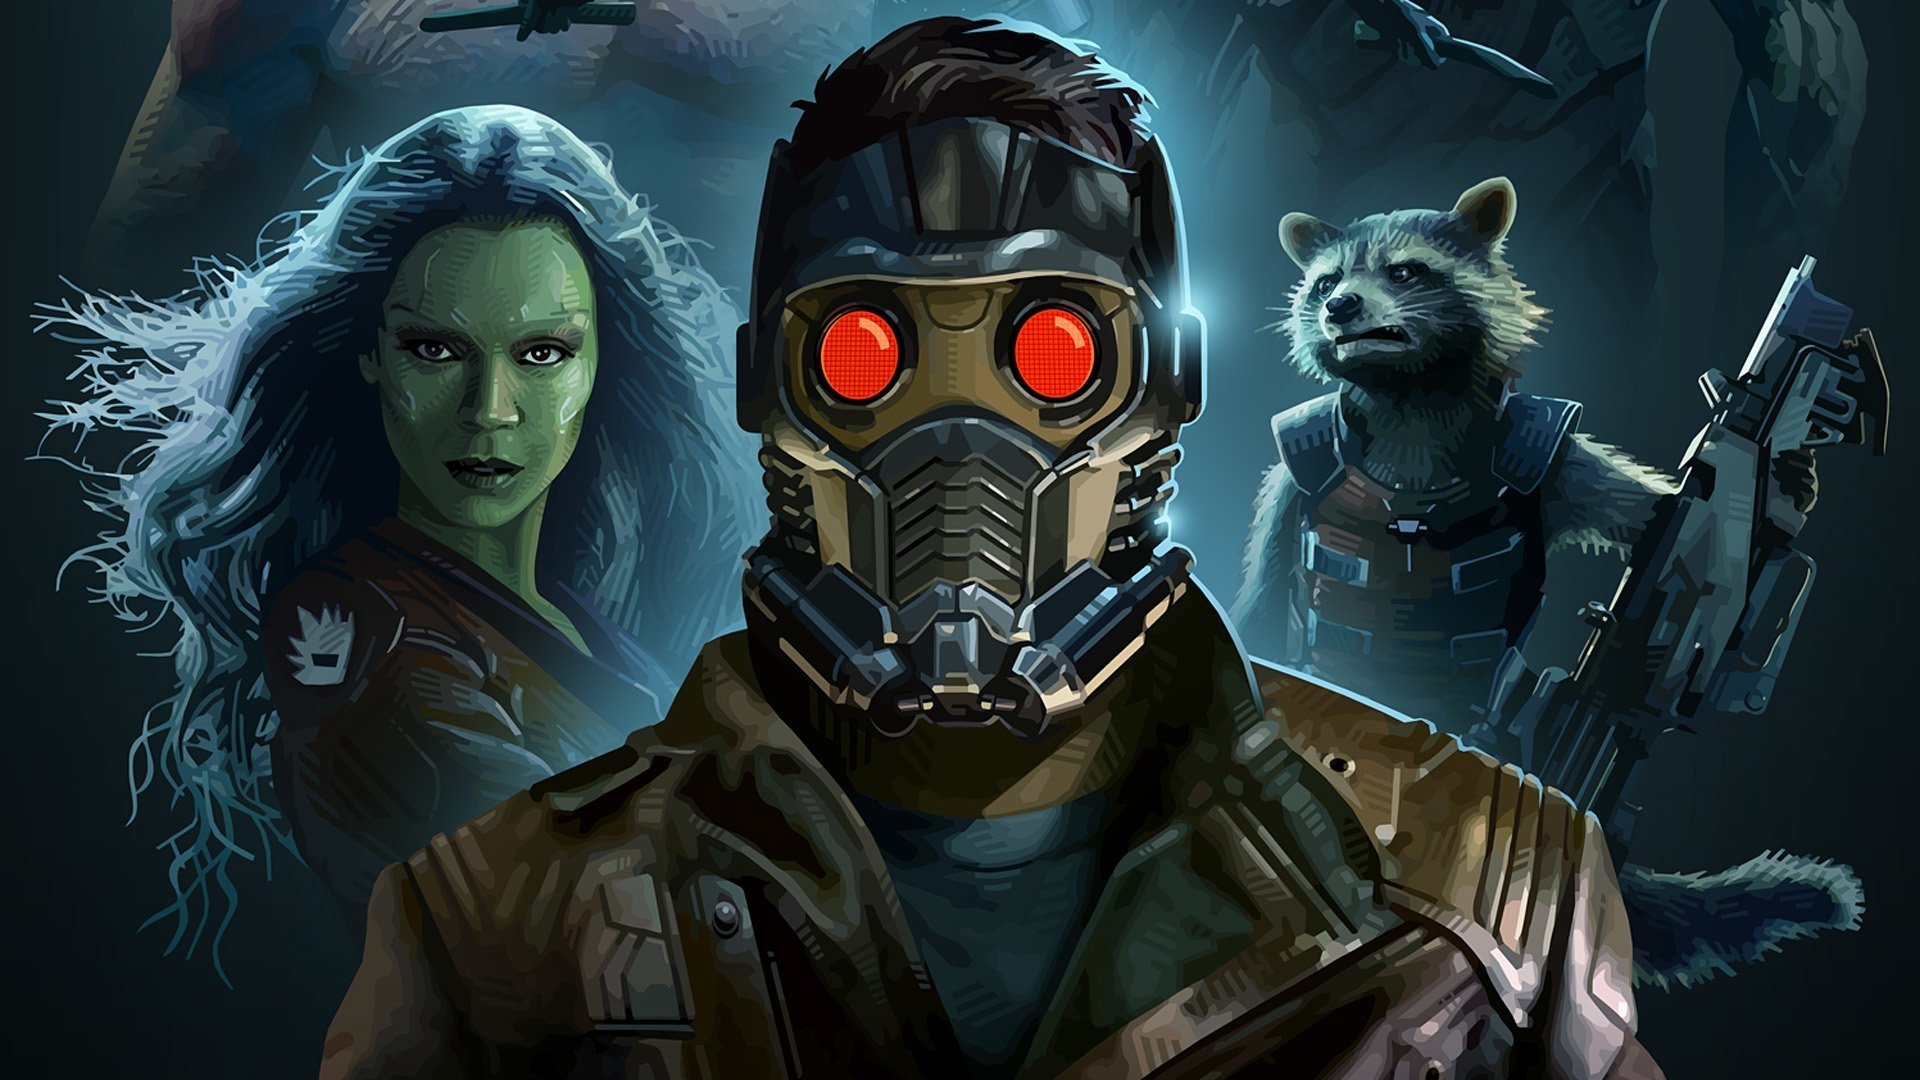 guardians of the galaxy iphone wallpaper,action adventure game,pc game,personal protective equipment,mask,costume